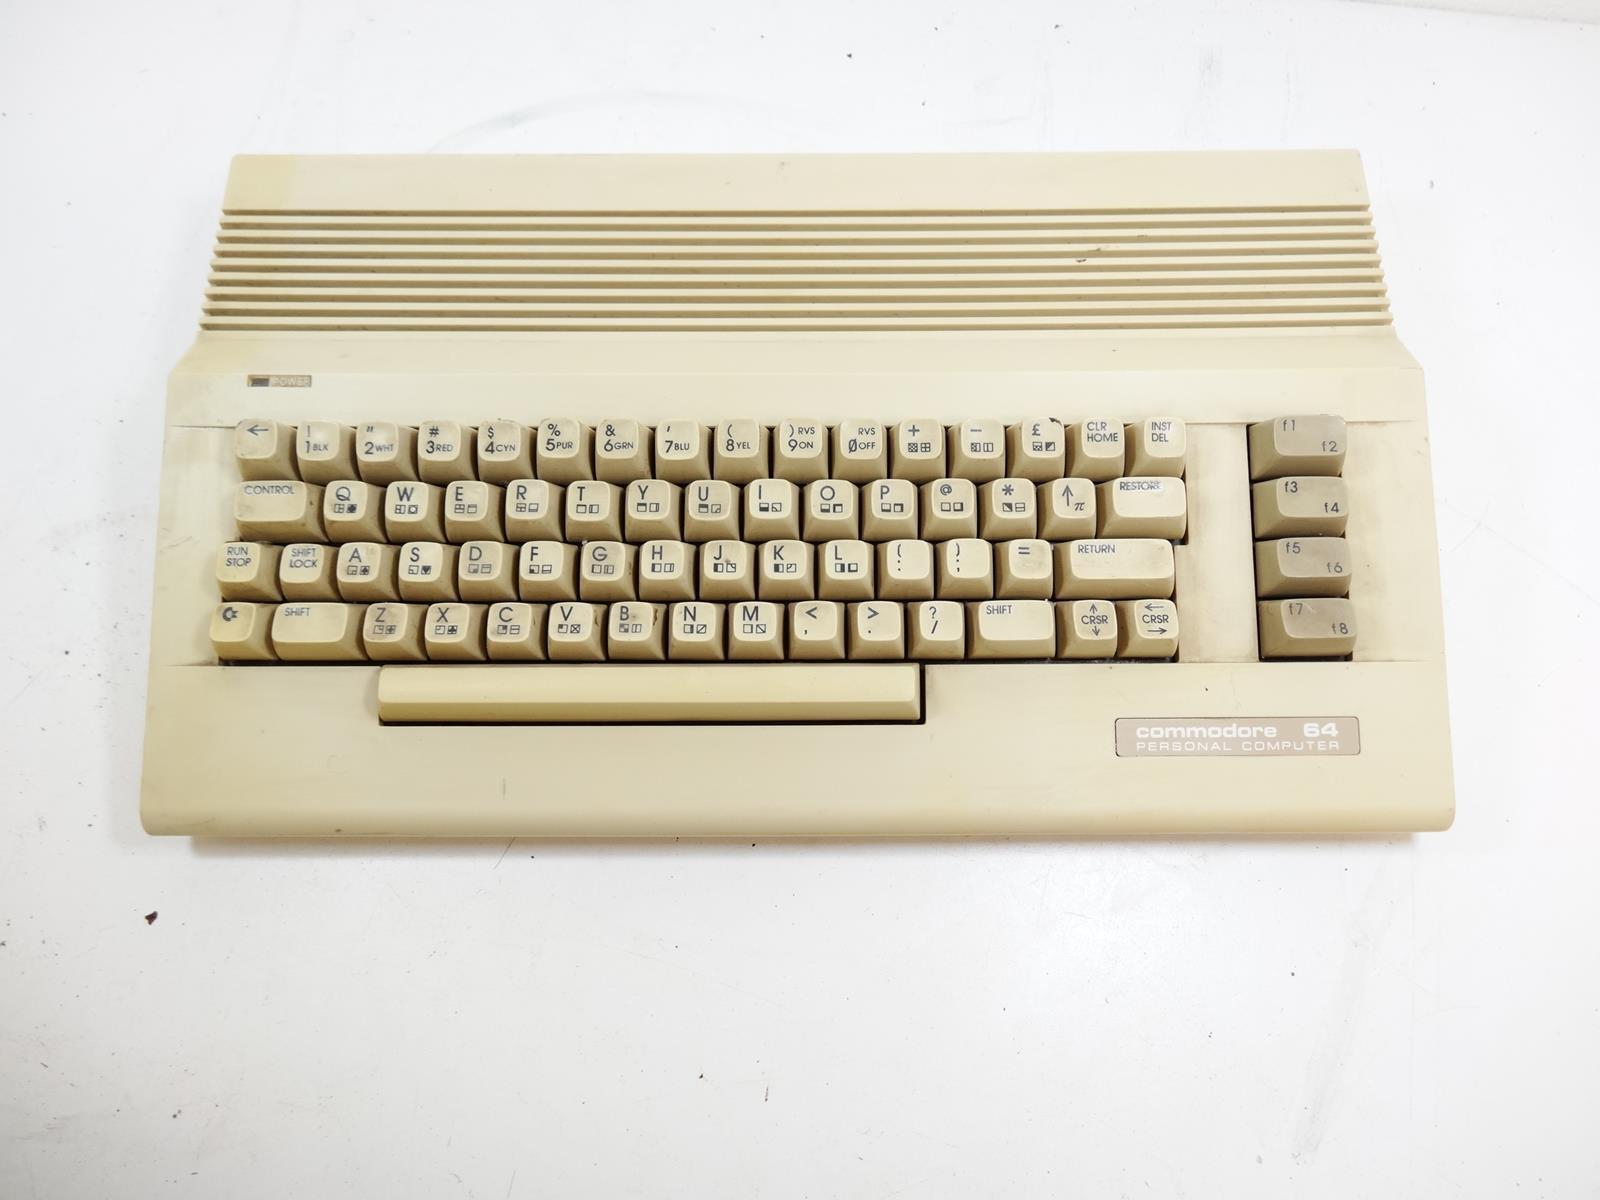 PARTS COMMODORE 64 PERSONAL COMPUTER Untested(5G3.AU)